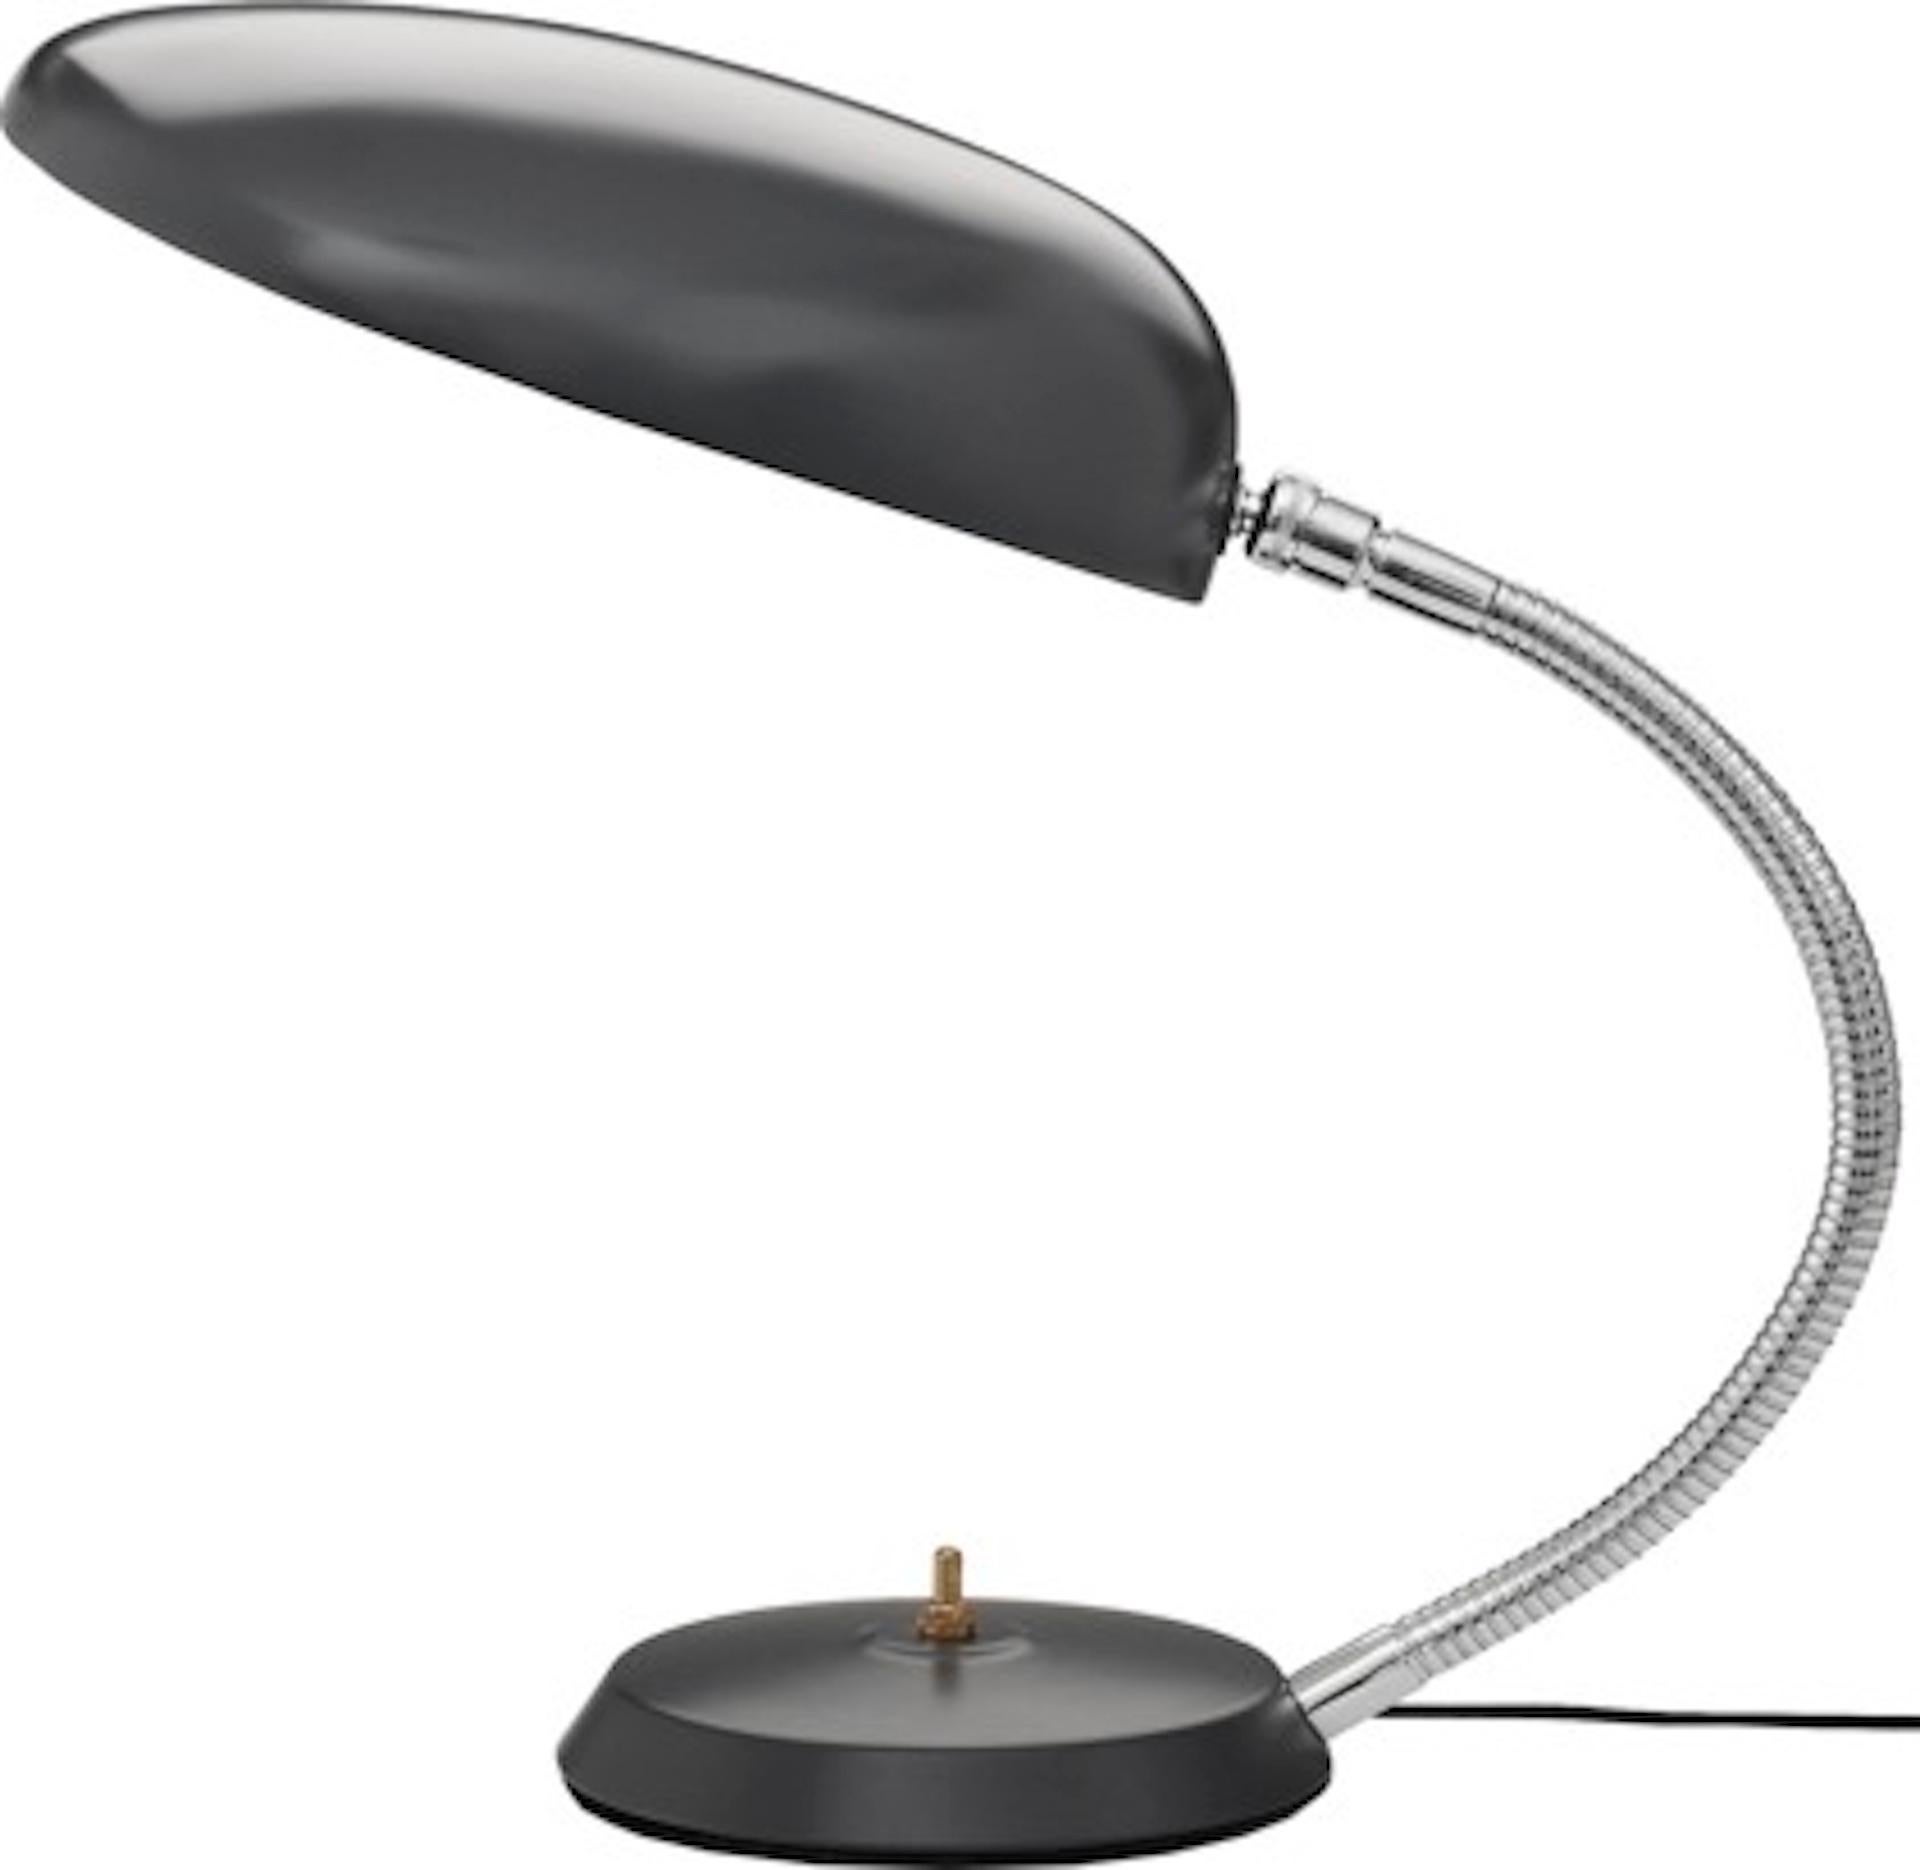 The authentic Cobra Table Lamp is of the most iconic designs by Greta M. Grossman. The table lamp was originally designed in the 1950s and takes its name from the shape of the oval shade, which is reminiscent of a cobra's neck. Due to its